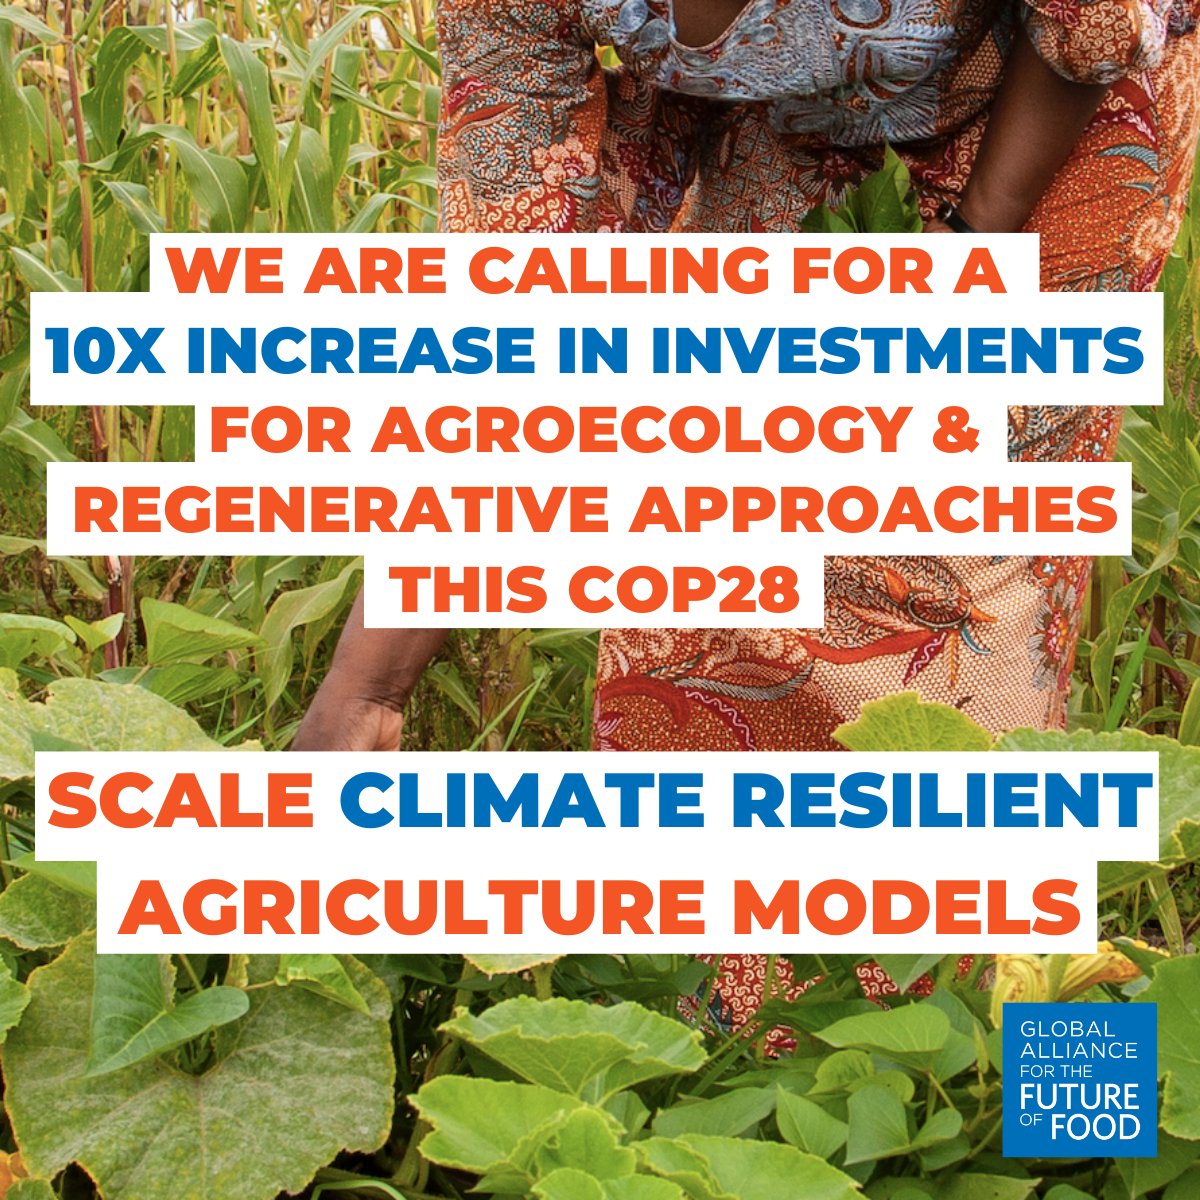 🚨ANNOUNCED AT #COP28: We are proud to be part of 20+ philanthropic funders calling for a 10x increase in annual investments for agroecology + regenerative approaches. Discover why scaling climate-resilient food systems is so urgent with our new research: futureoffood.org/insights/major…